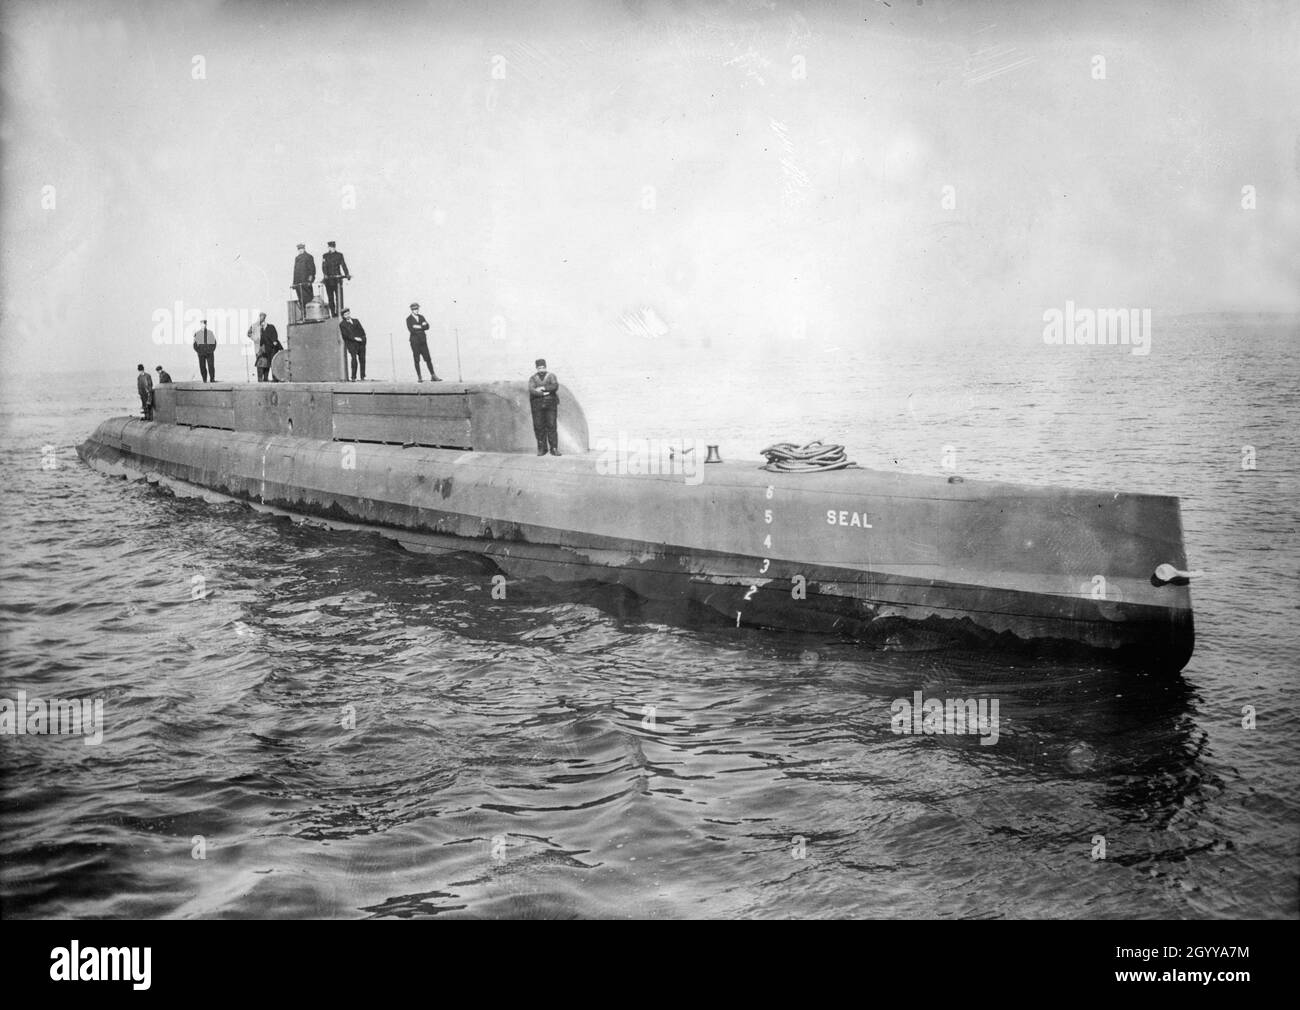 A vintage photo circa 1911 of the USS Seal G-1 (SS-19½) submarine launched February 8th 1911 designed by the engineer Simon Lake and built by the Newport News Shipbuilding Company.  She was used as a target after decommisioning and sunk June 21st 1921 Stock Photo